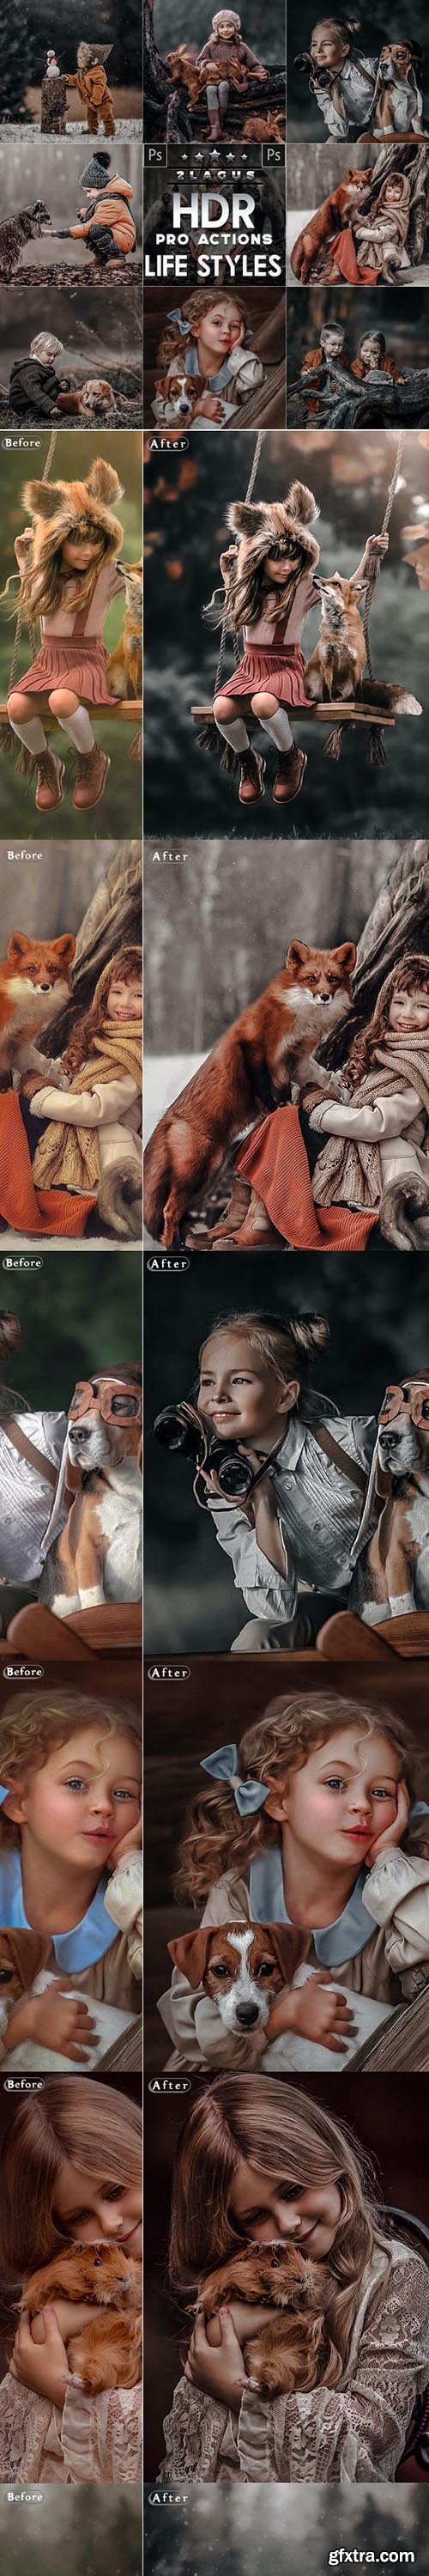 GraphicRiver - PRO HDR Photoshop Actions 26629578